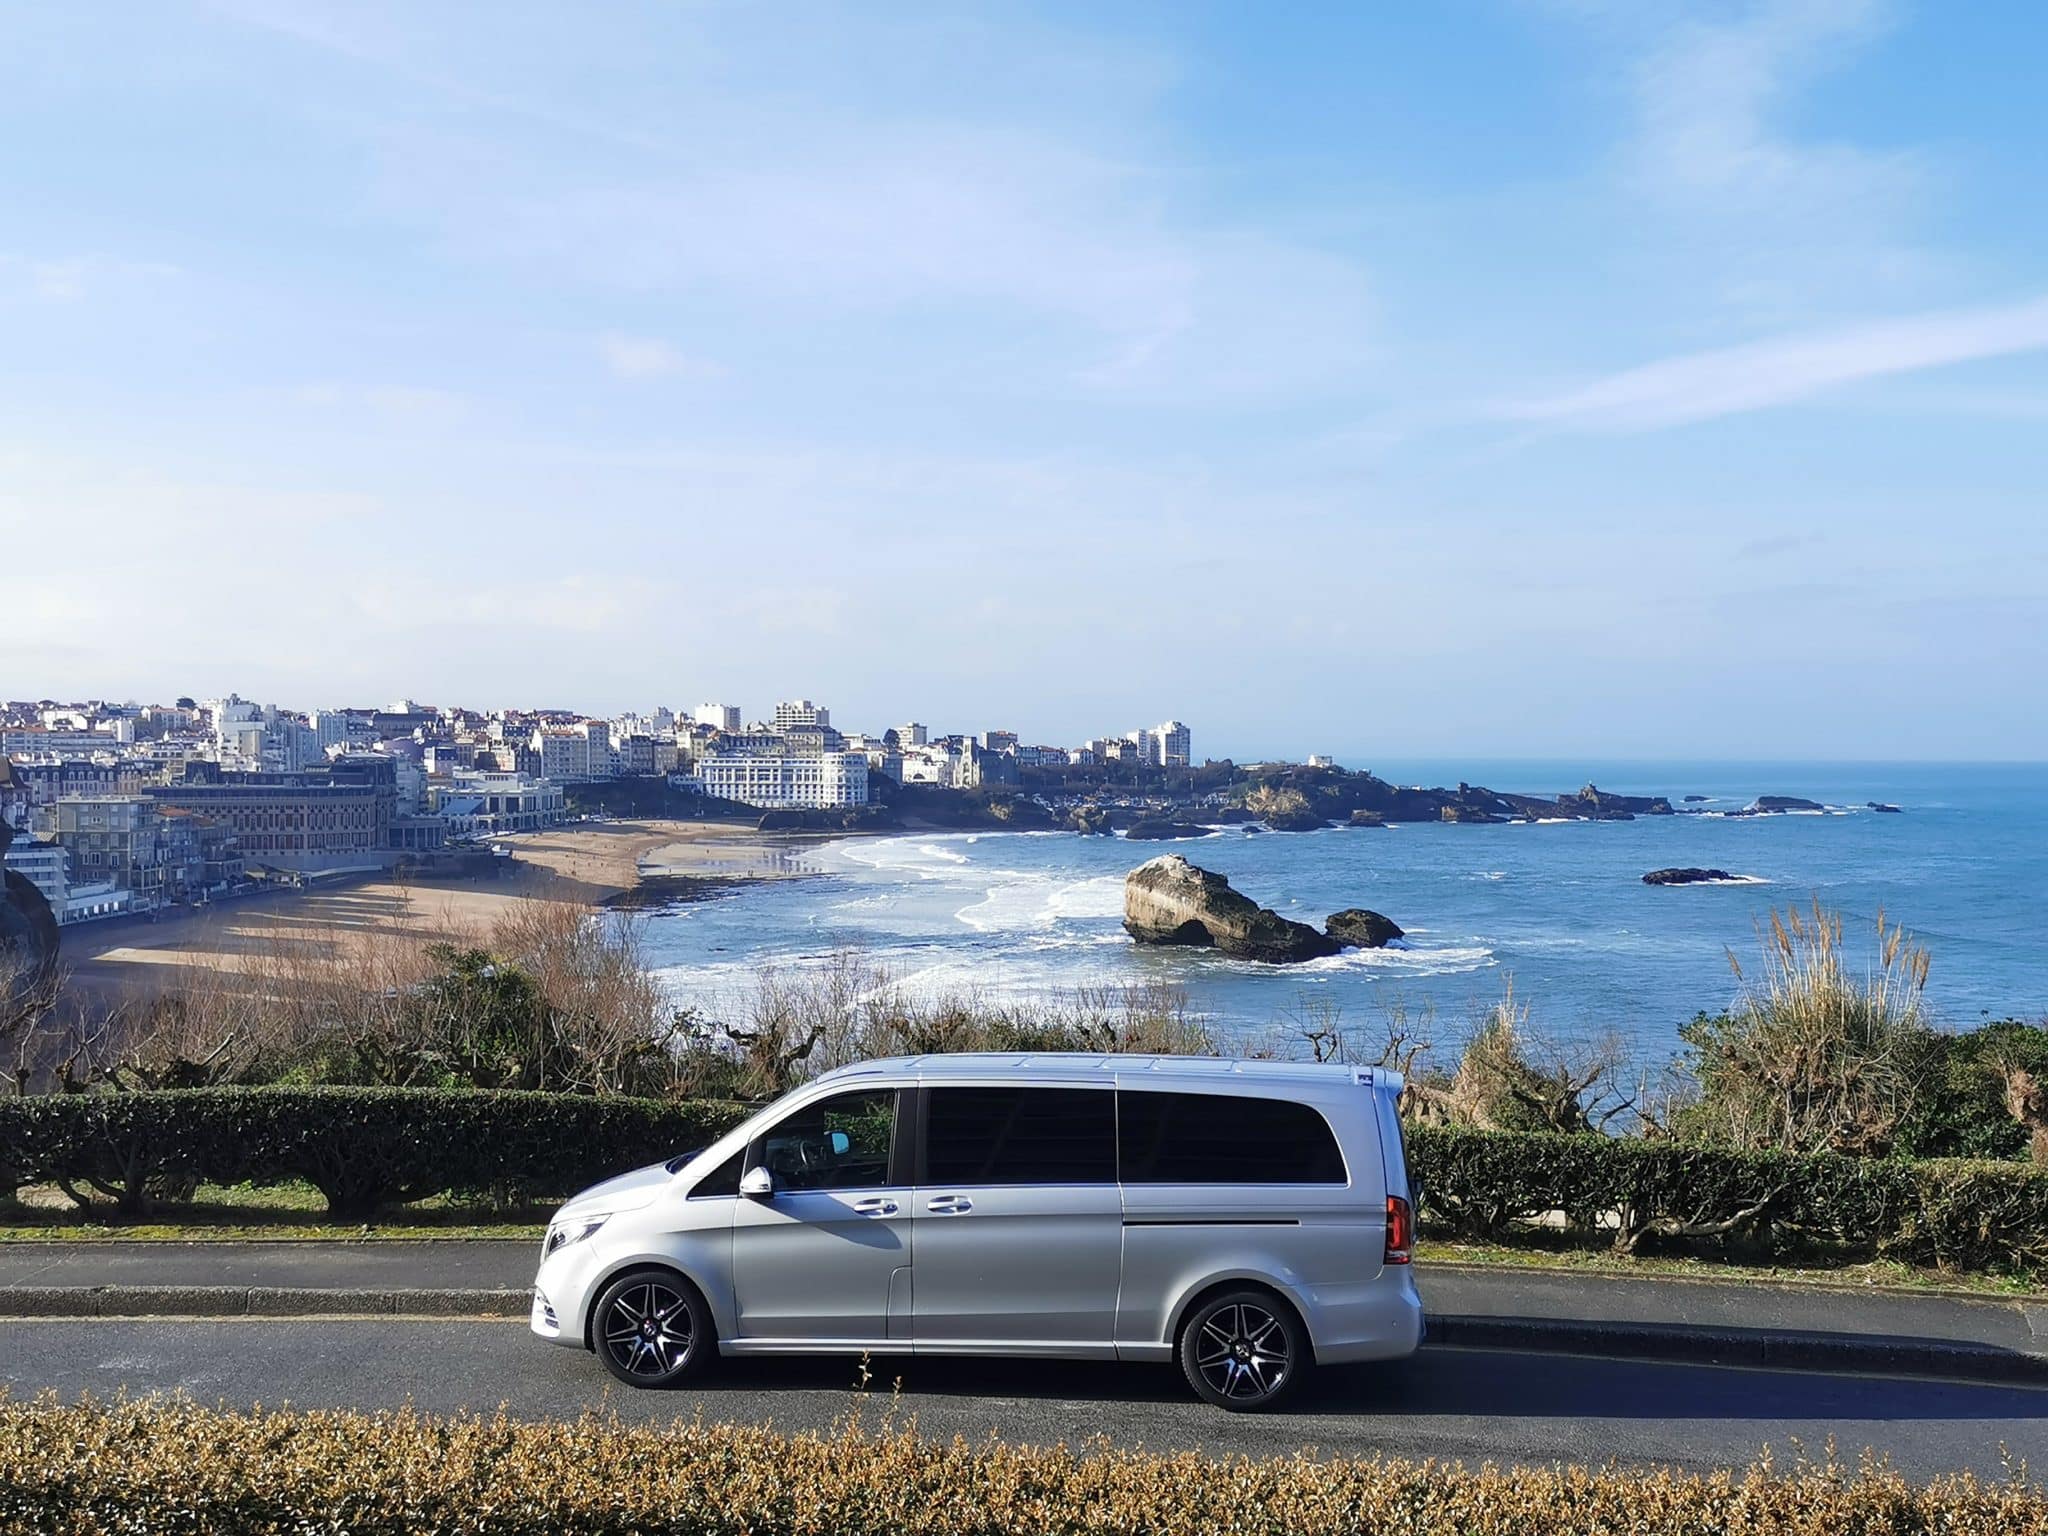 Vtc Taxi Biarritz Gare SNCF